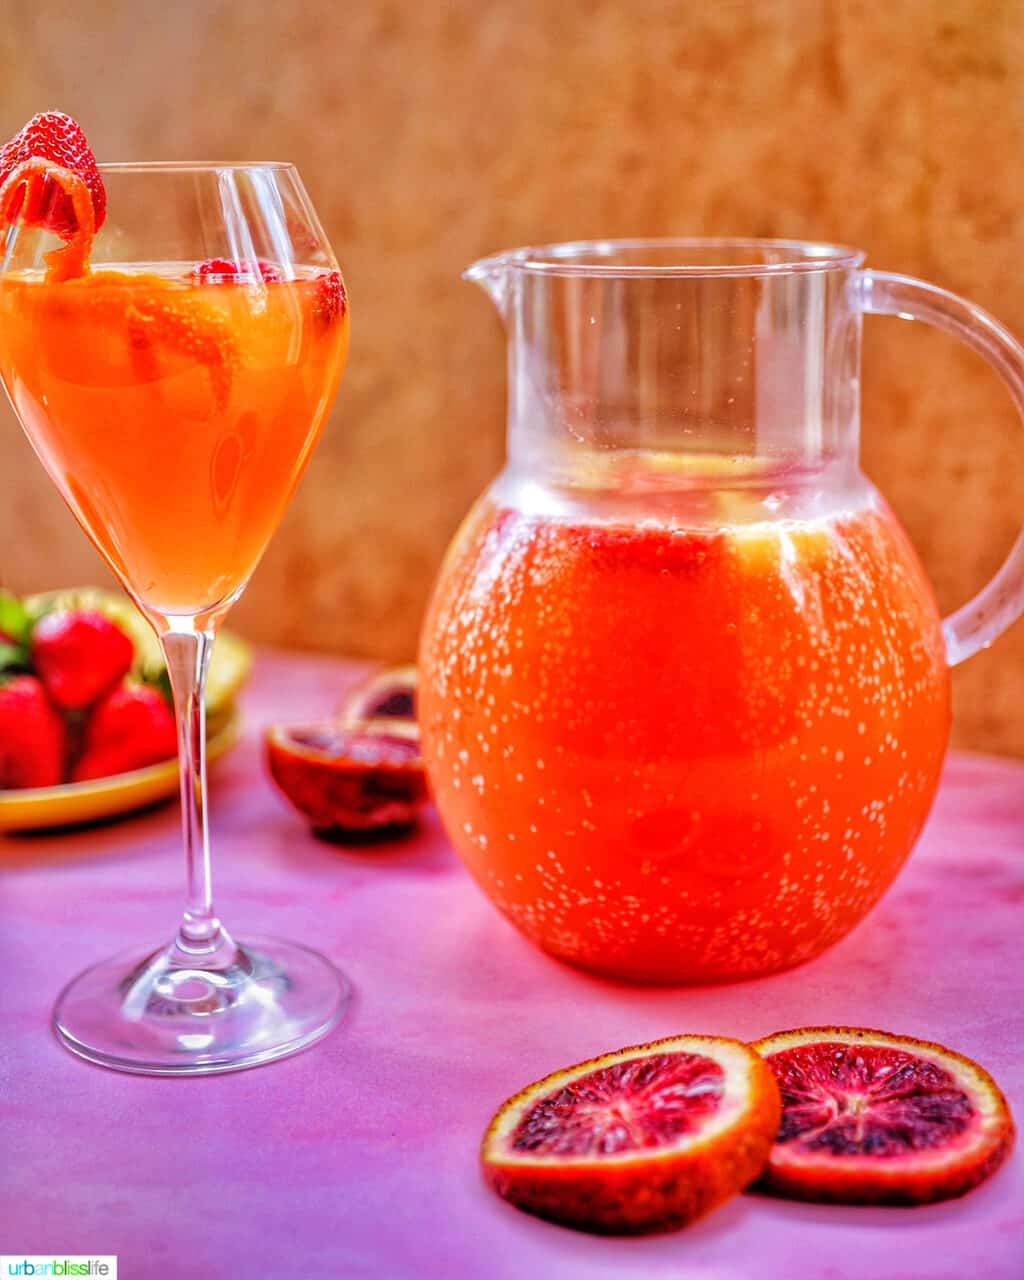 glass of tropical sangria with raspberries and citrus on a pink table with berries and a pitcher of sangria in the background.